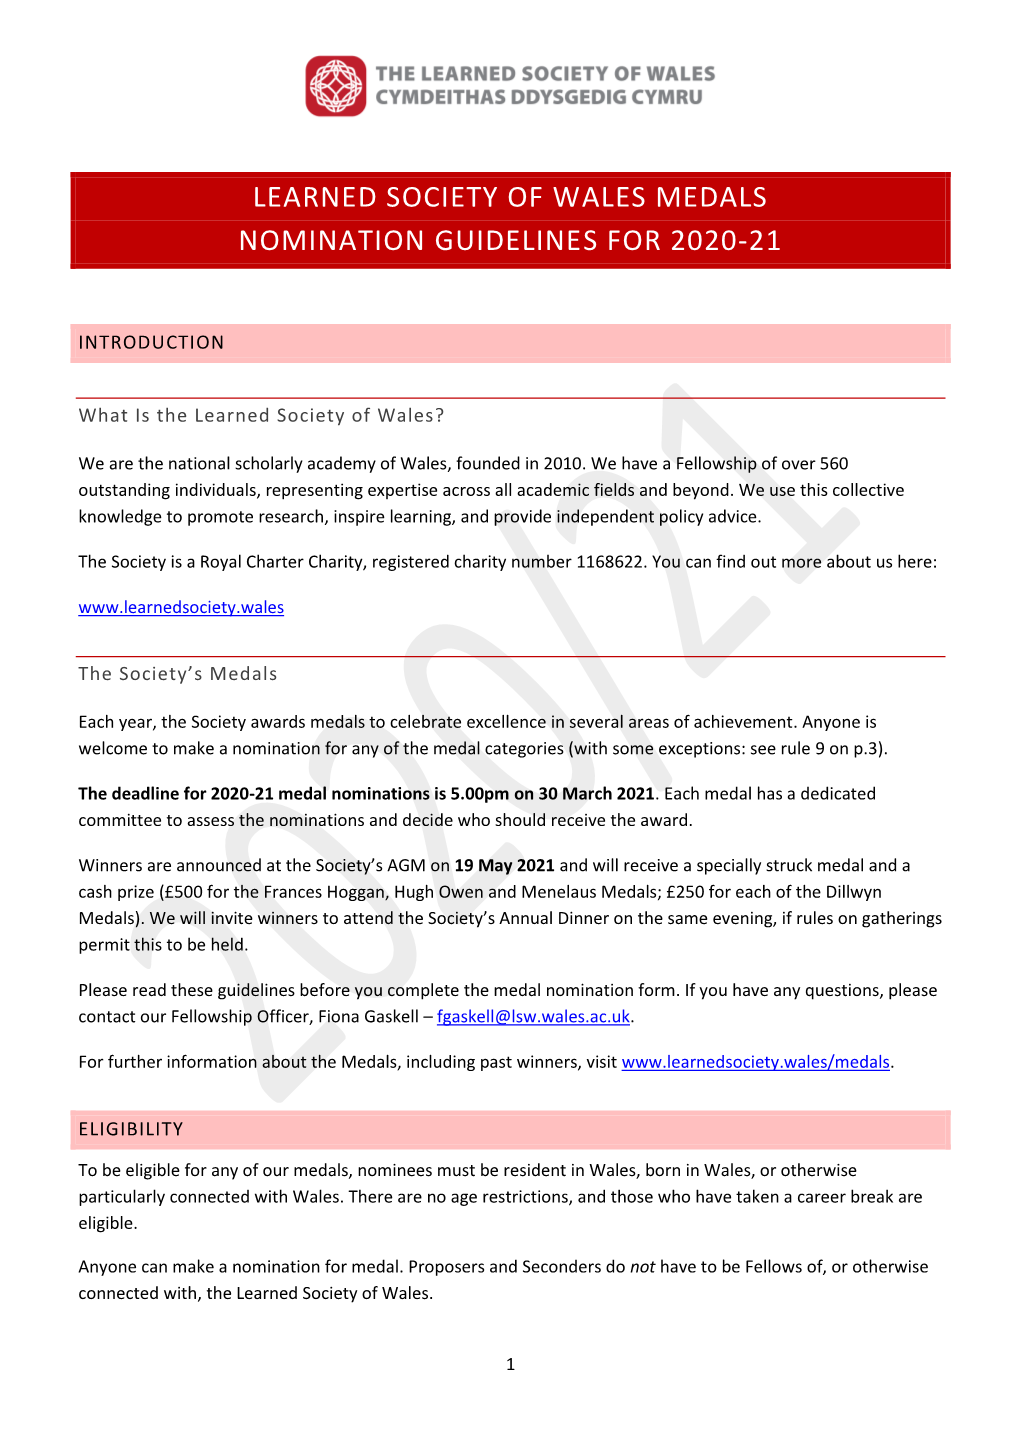 Learned Society of Wales Medals Nomination Guidelines for 2020-21